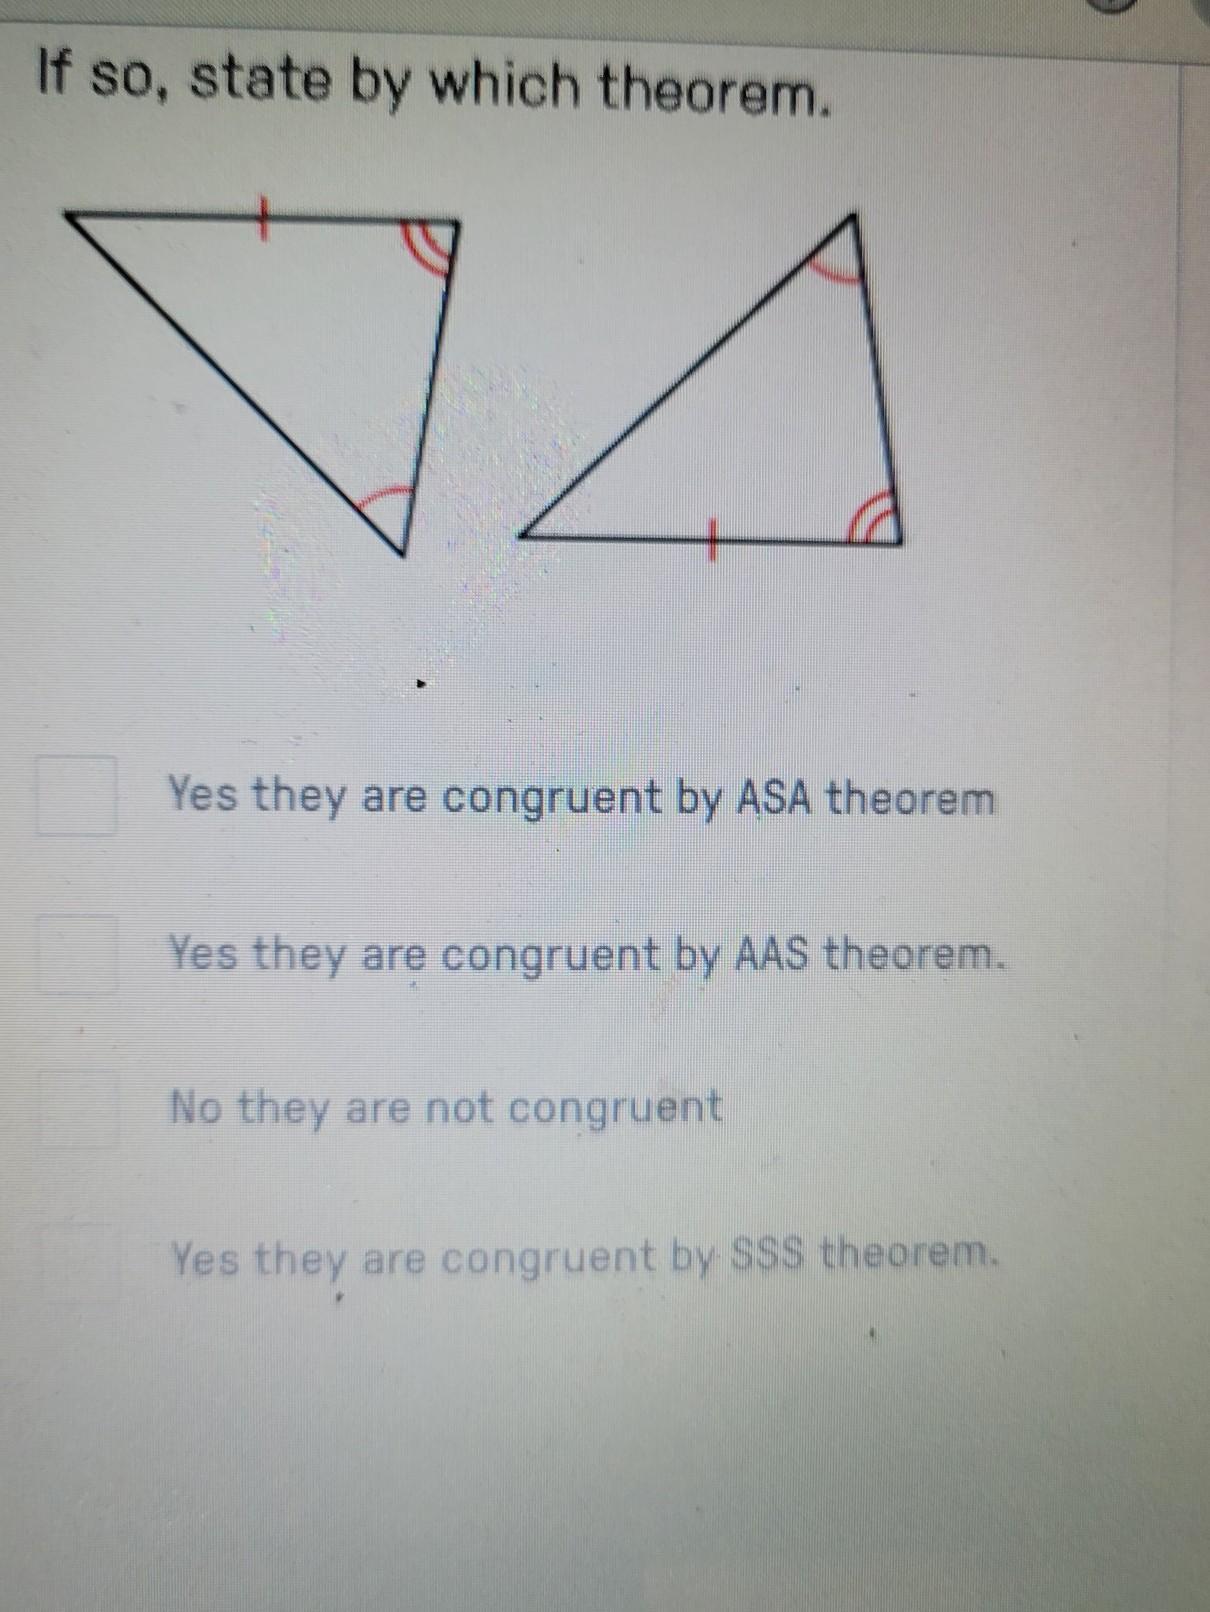 Using The Figure Below, Tell If The Triangles Are Congruent, And If So By What Theorem? Help Me Please